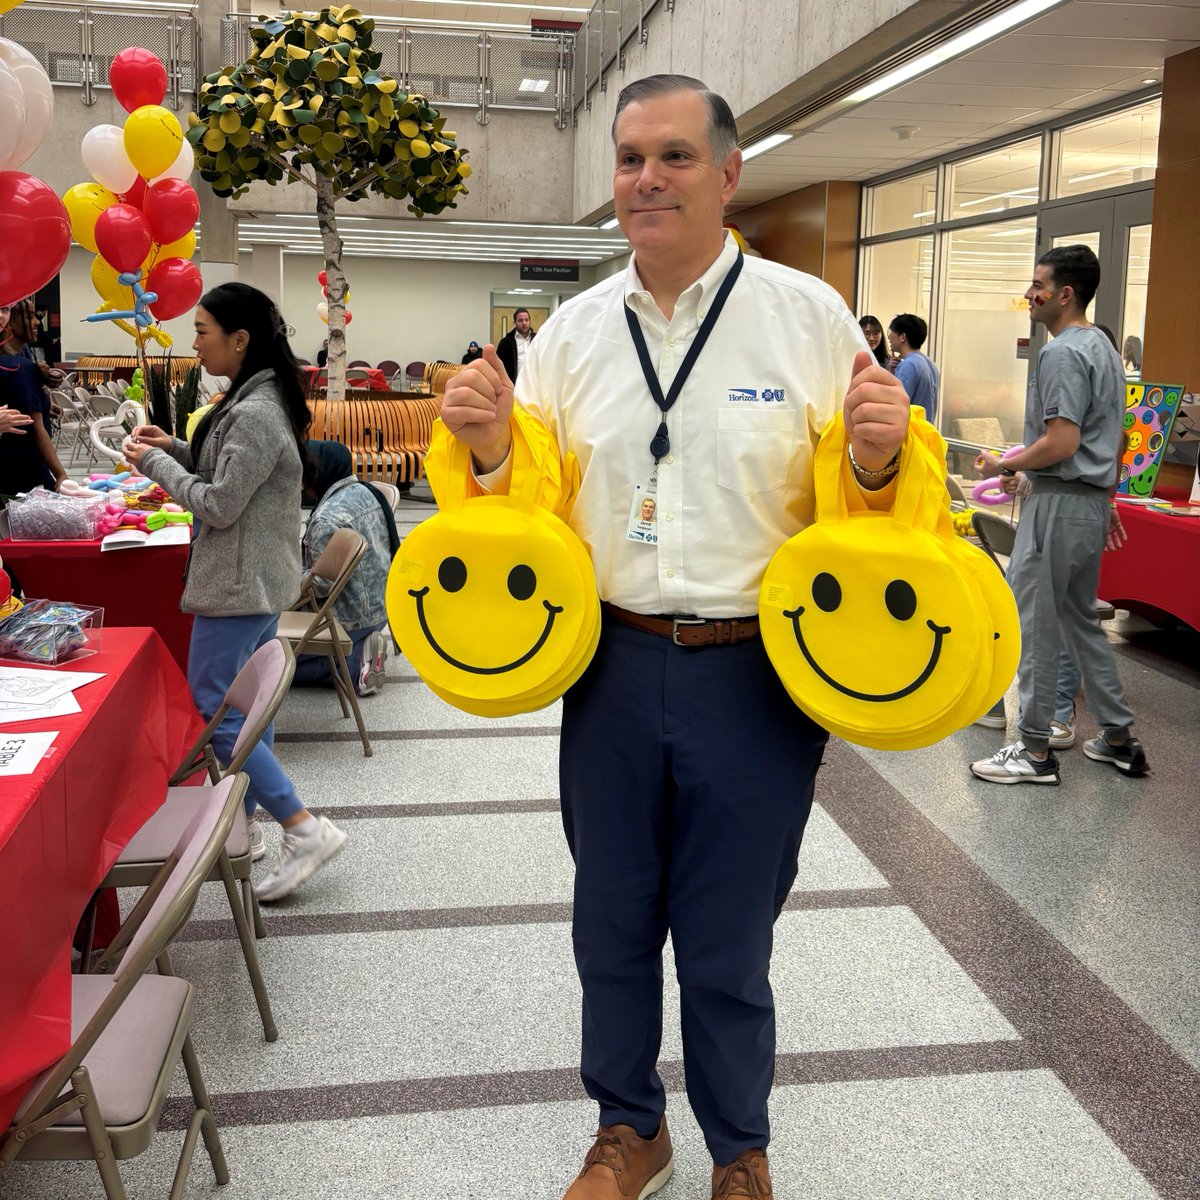 Horizon joined @Rutgers_Dental in celebrating National Give Kids a Smile Day last Friday in Newark and provided free oral health screenings and cleanings for kids at the event. #horizoncares #givekidsasmileday #childrensdentalhealthmonth